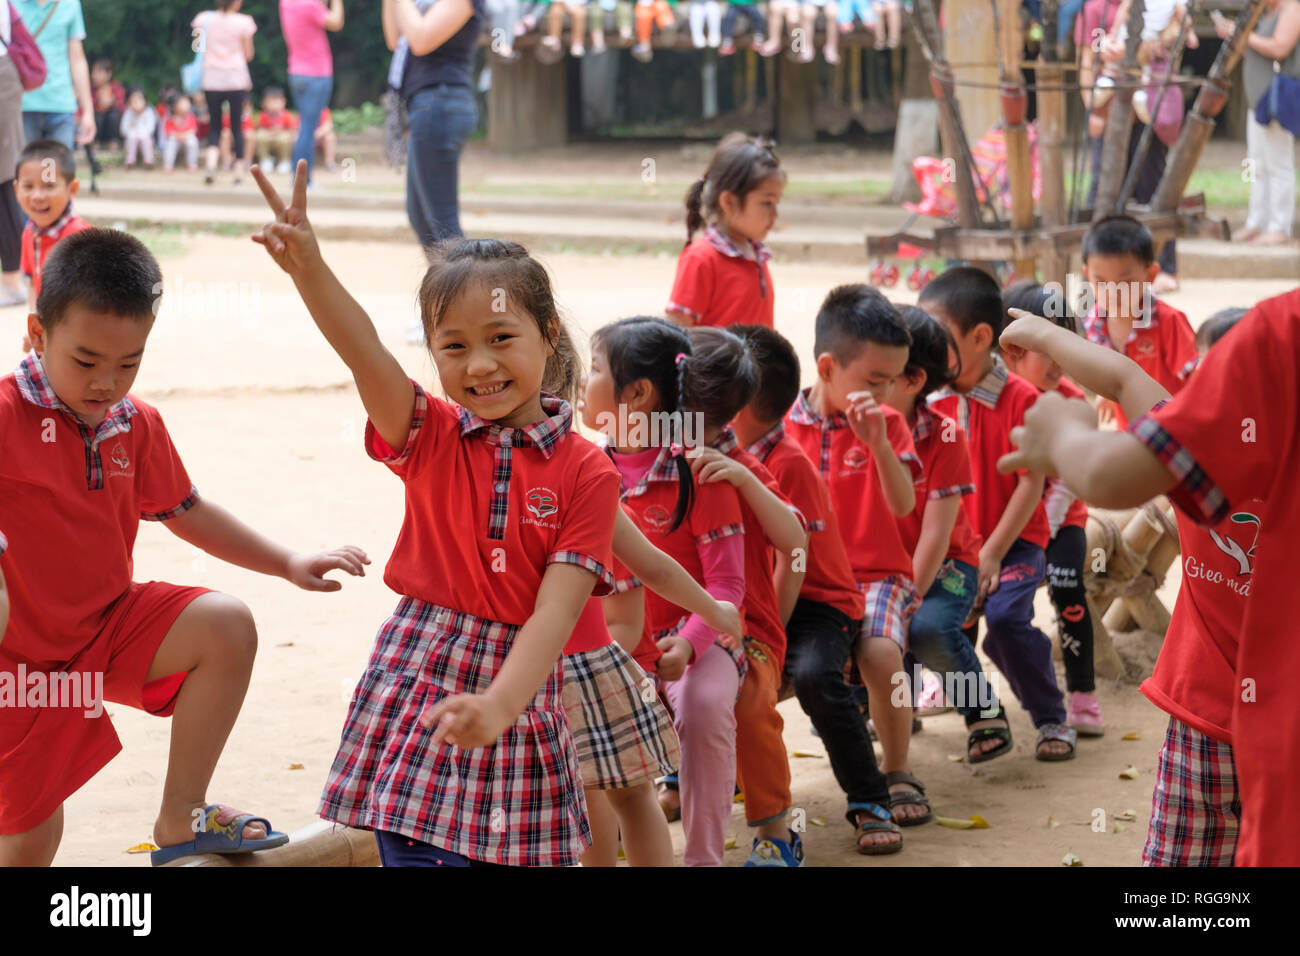 Asian young children with school uniforms during a day trip Stock Photo